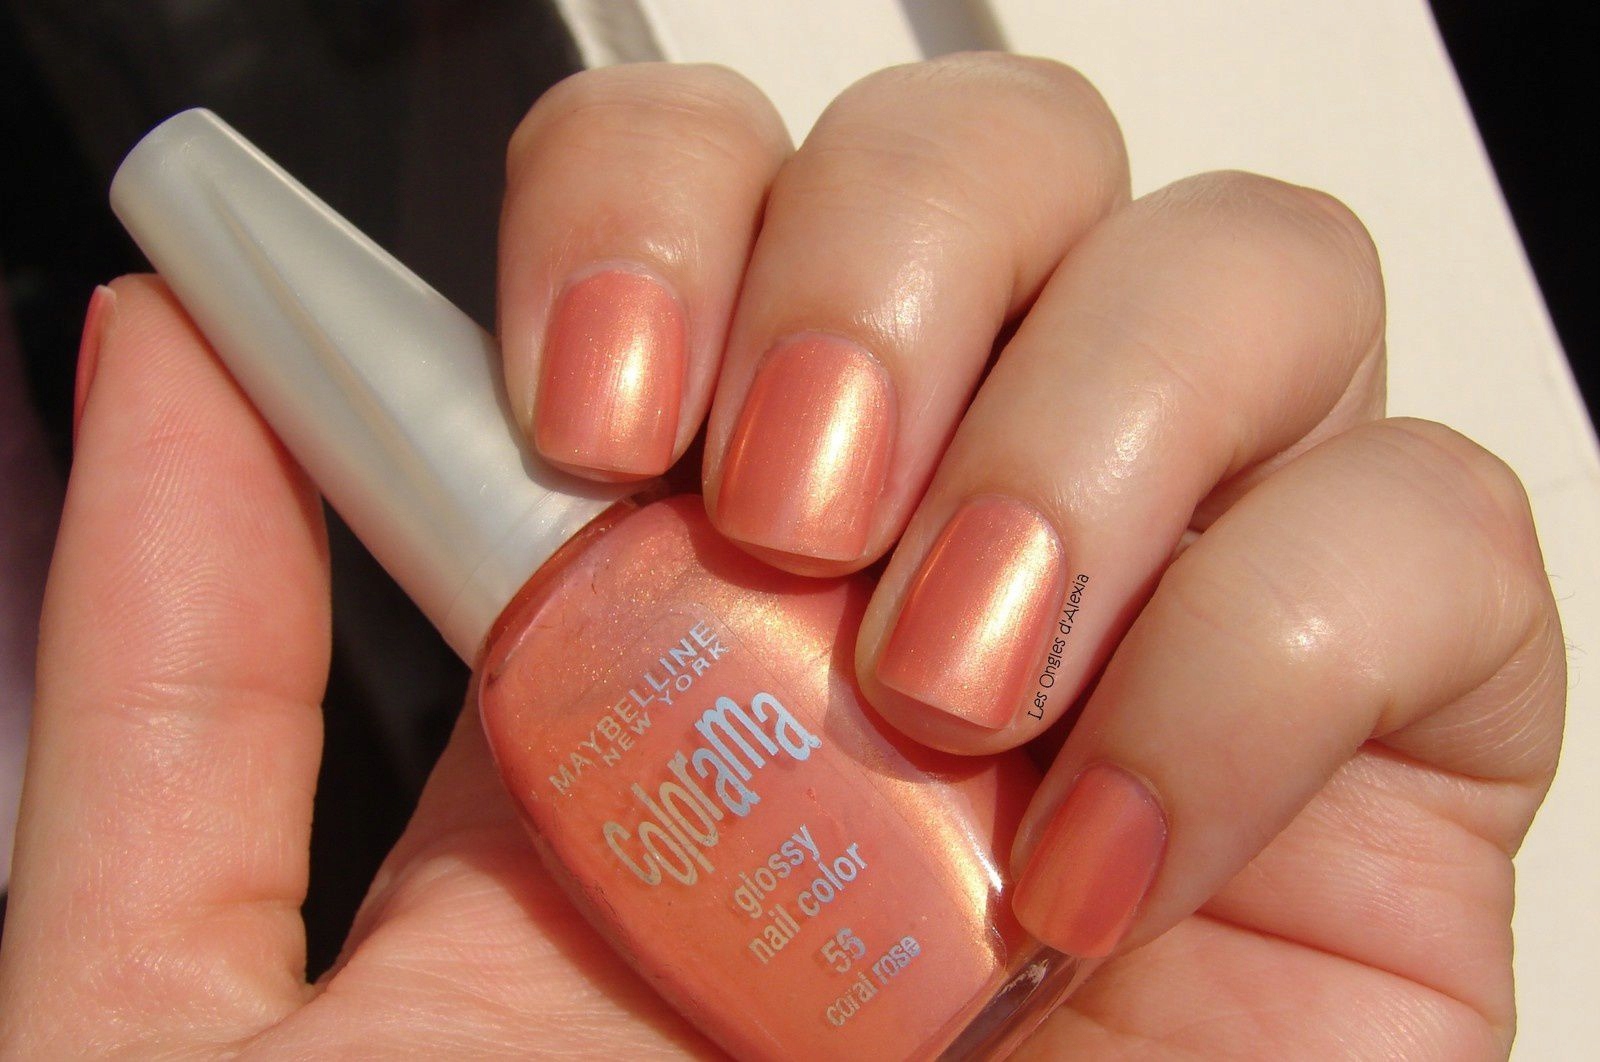 MAYBELLINE COLORAMA lakier do paznokci Coral Rose